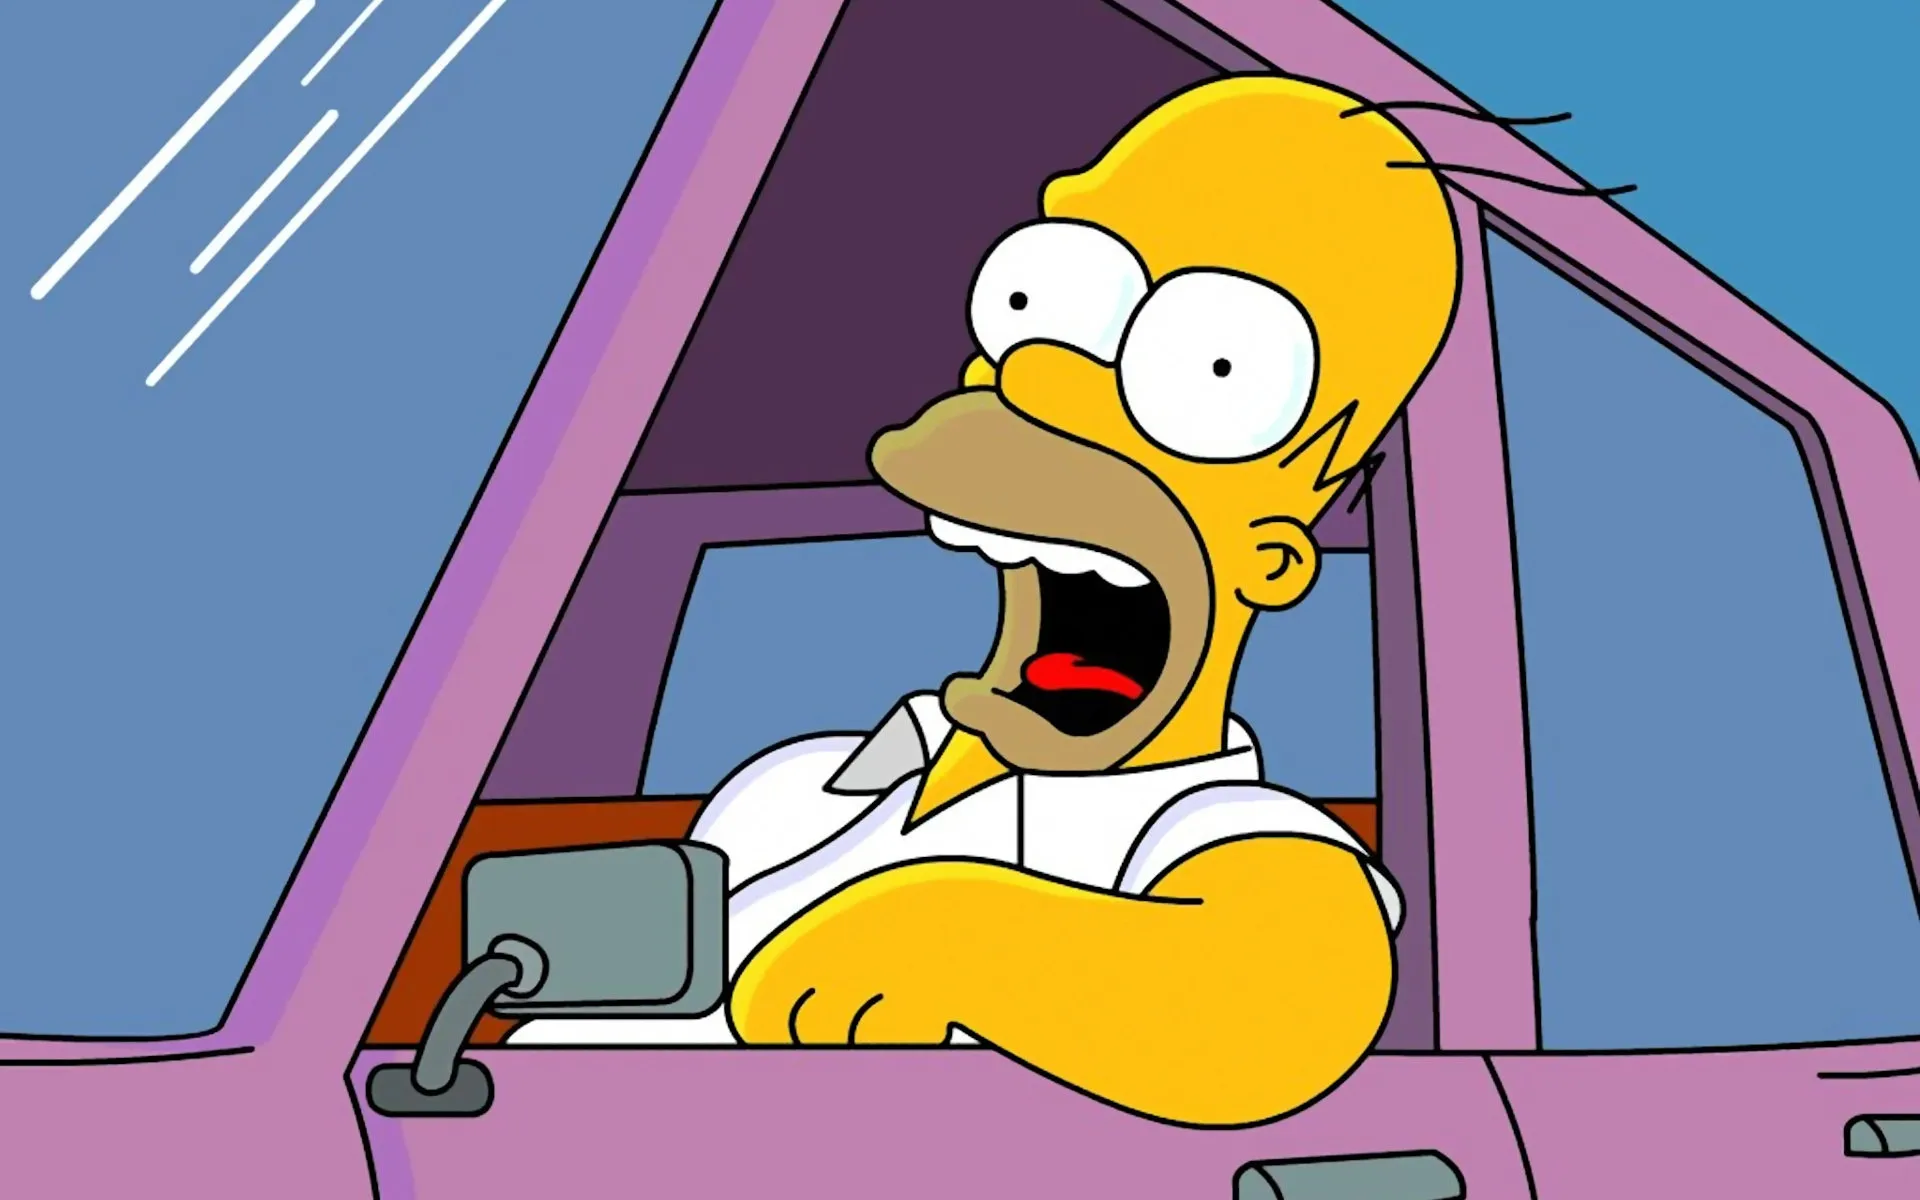 https://thenewswheel.com/we-finally-know-exactly-what-kind-of-car-homer-simpson-drives/ Source: The News Wheel